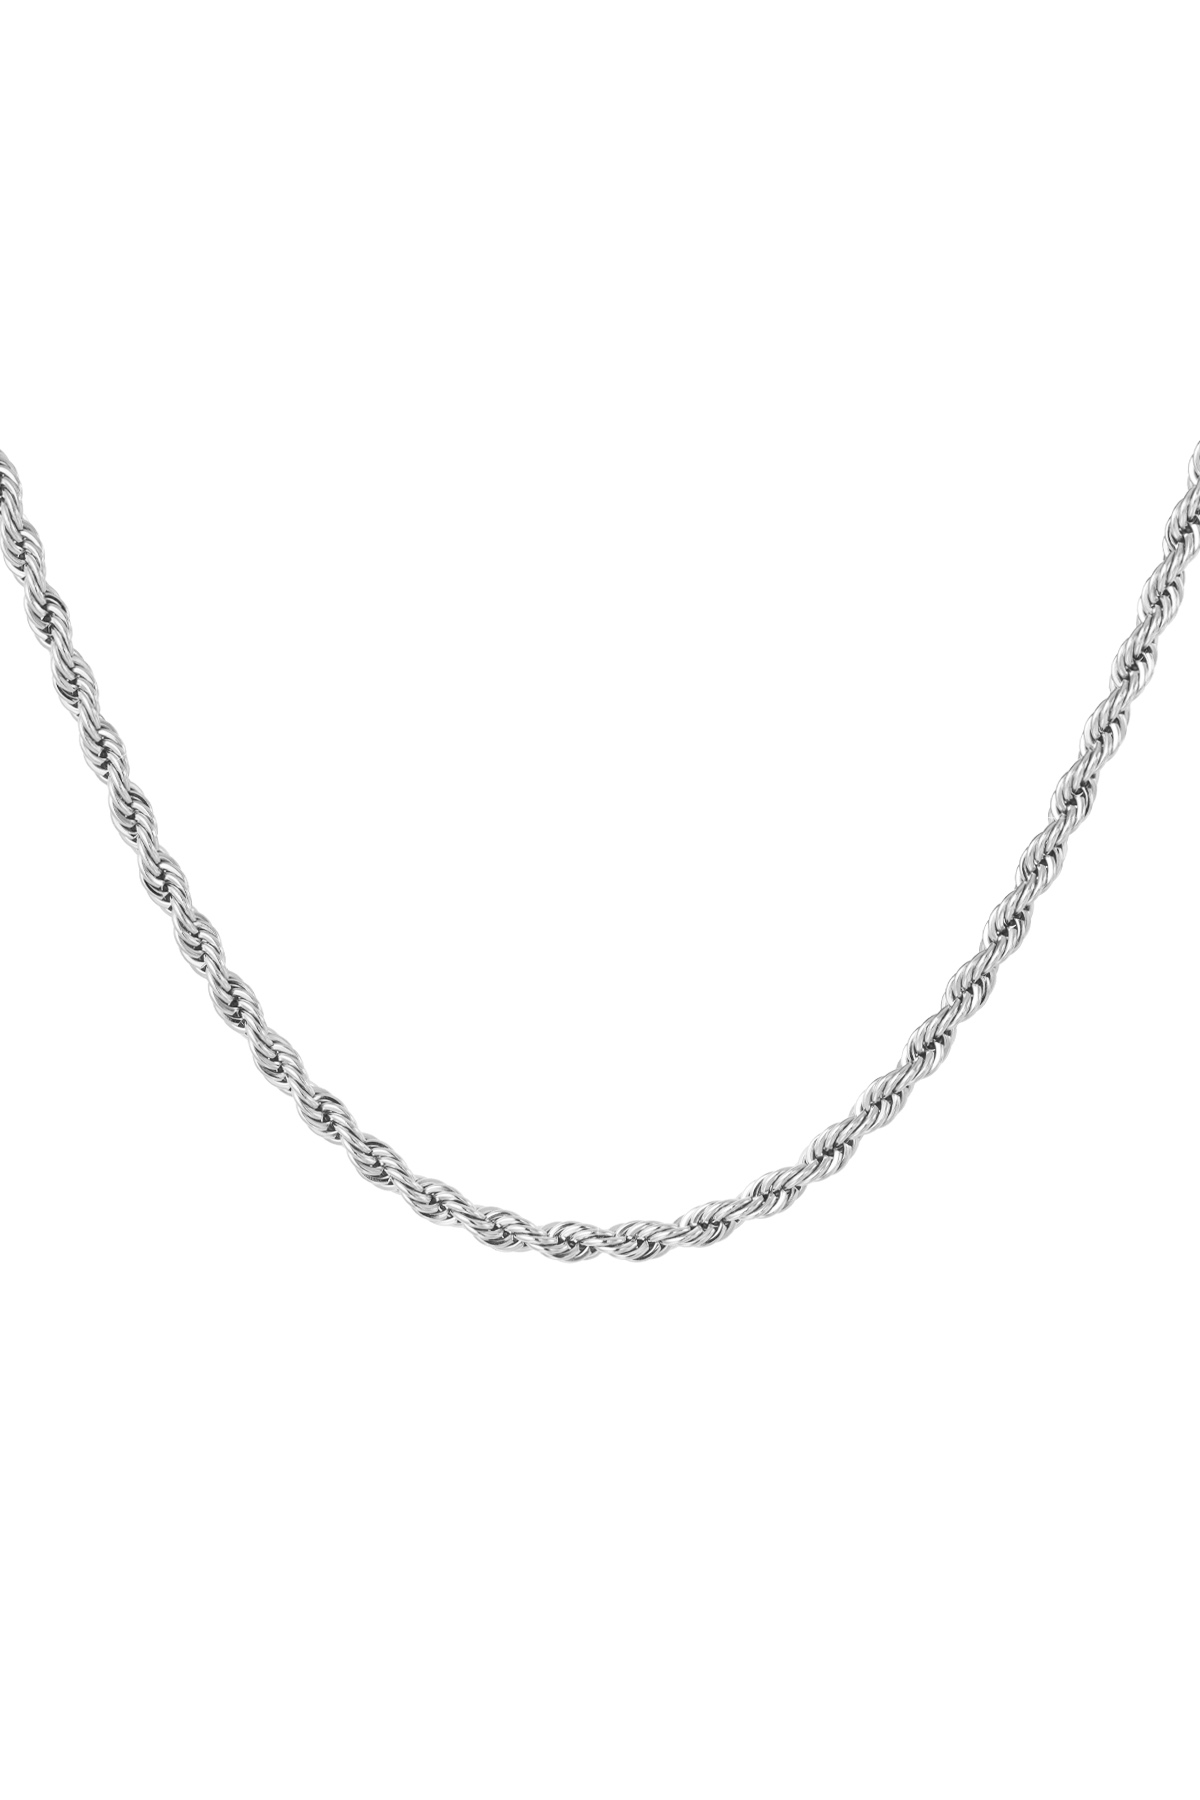 Unisex necklace twisted 50cm - silver-4.0MM